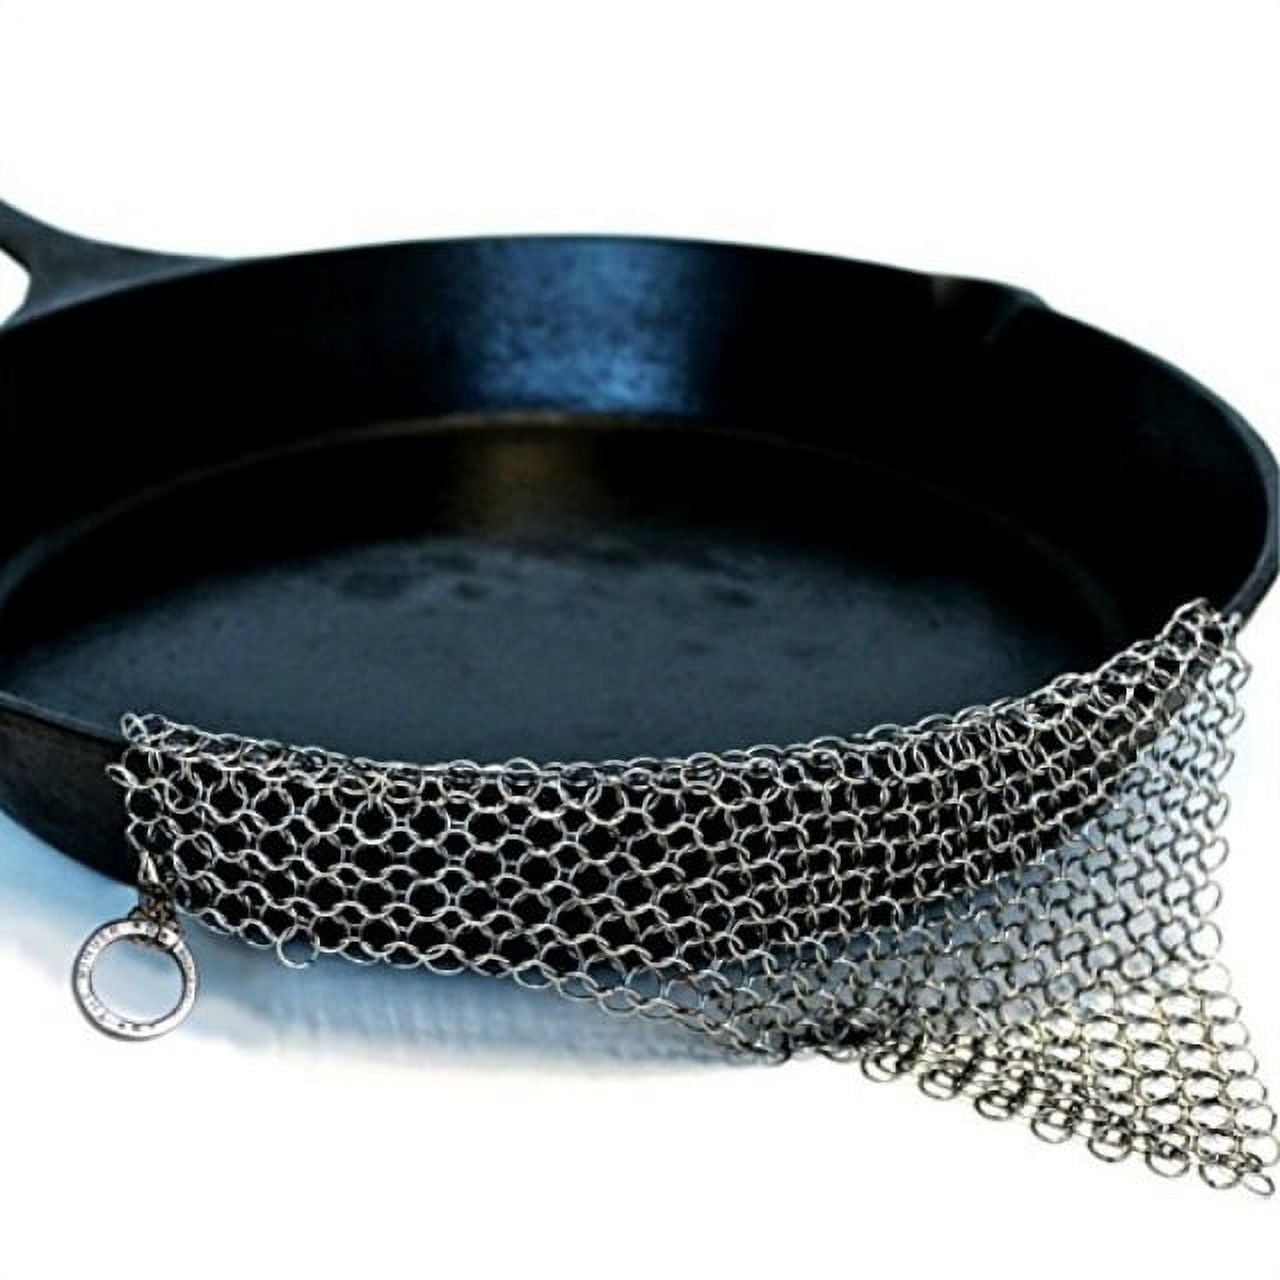 Cast Iron Scrubber with Handle, Chain Mail Scrubber Cast Iron Cleaner, 316 Chainmail  Scrubber for Cast Iron Pans,Cast Iron Cleaning Cast Iron Pan Scraper Tool  for Dutch Oven, Carbon Steel, Frying Pan